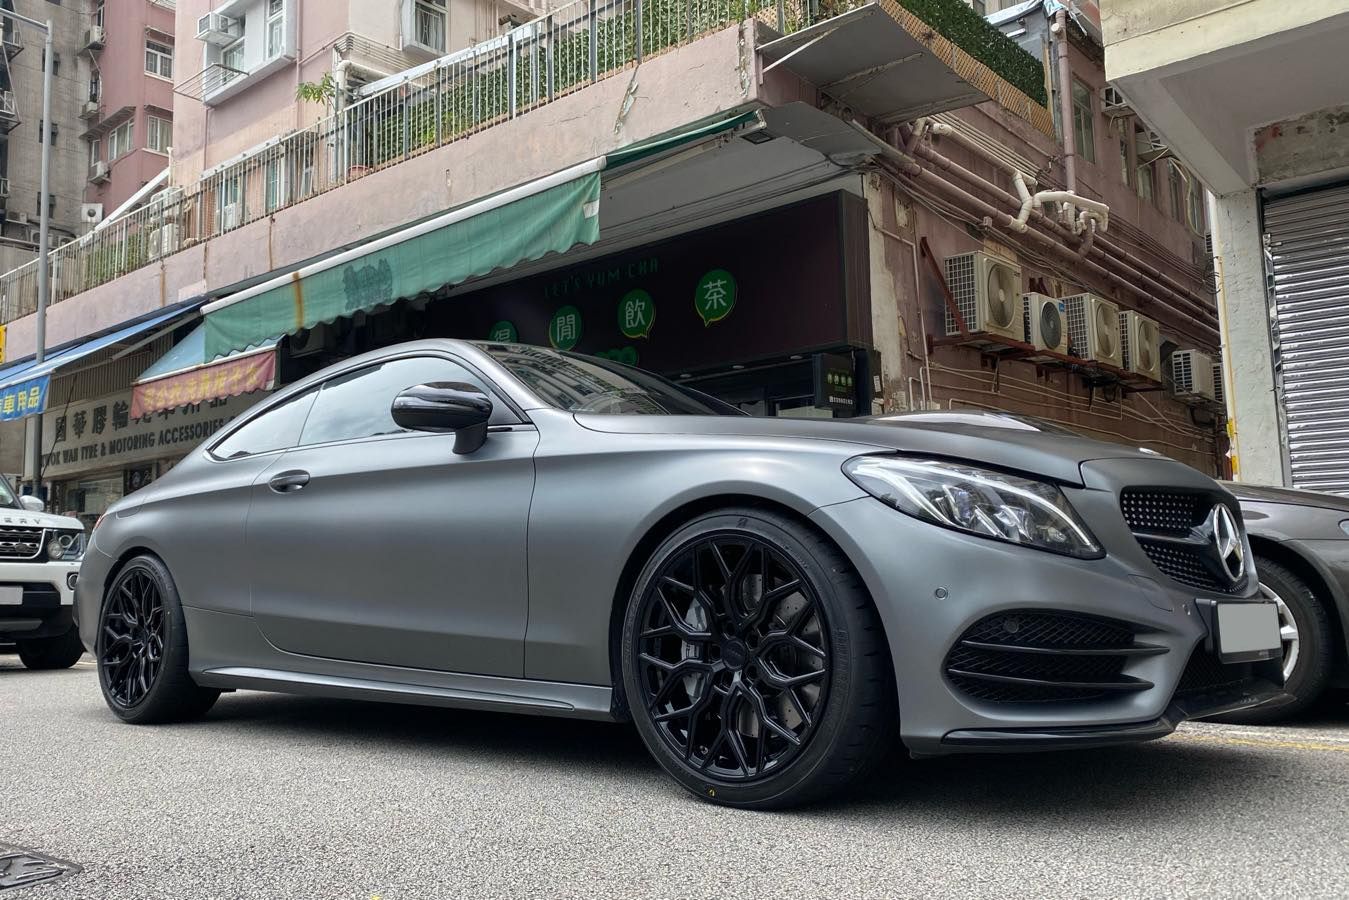 Mercedes-Benz C43 AMG W205 with 19×8.5 and 19×9.5-inch Vossen HF-2